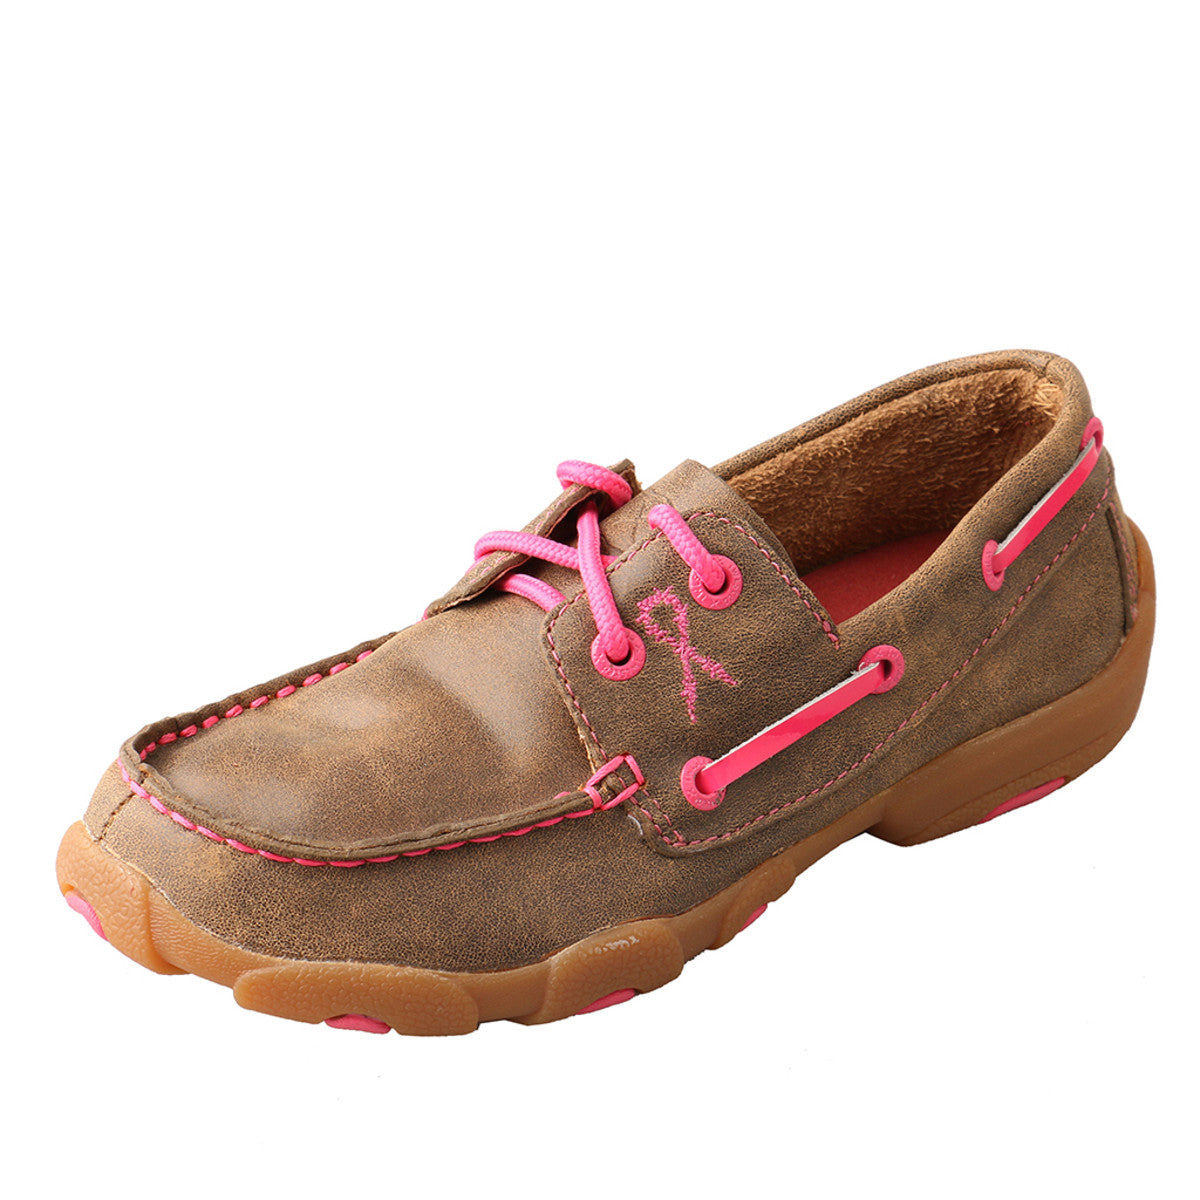 Kids' Twisted X Boat Shoe Driving Moccasins in Bomber & Neon Pink from the side view